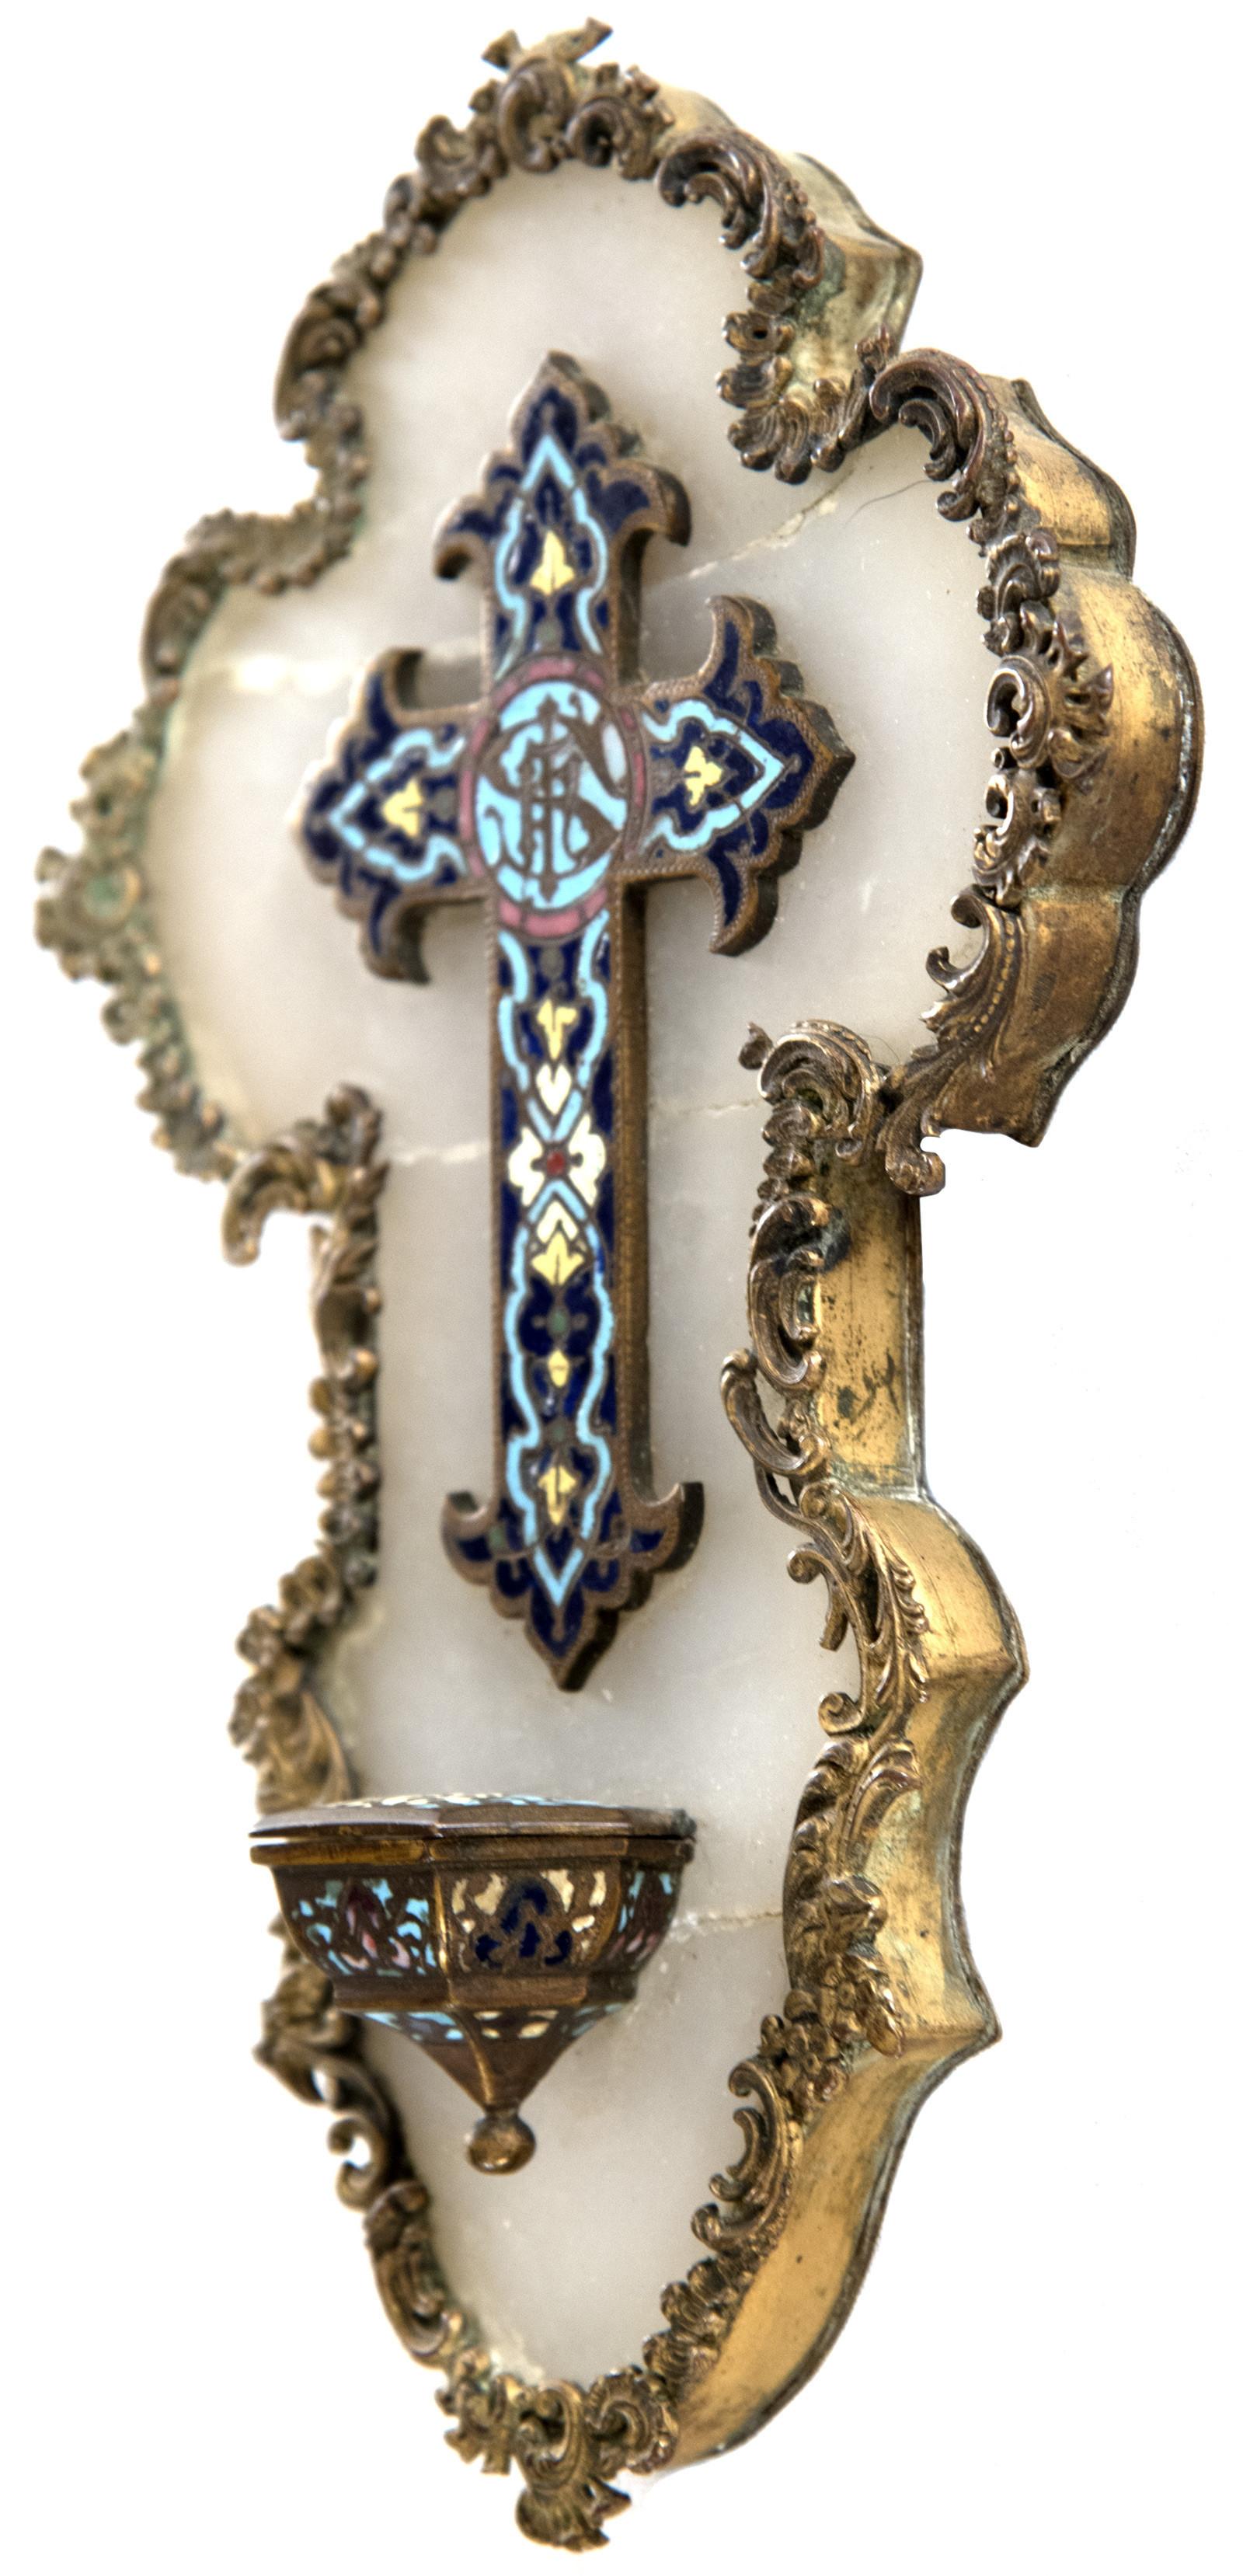 The hand painted enamel cross is decorated with a colourful motif in teal, rose, and yellow on a dark blue ground, the design further enhanced by its decorative form. The center stem is inlaid with the representation of the name of Jesus with the